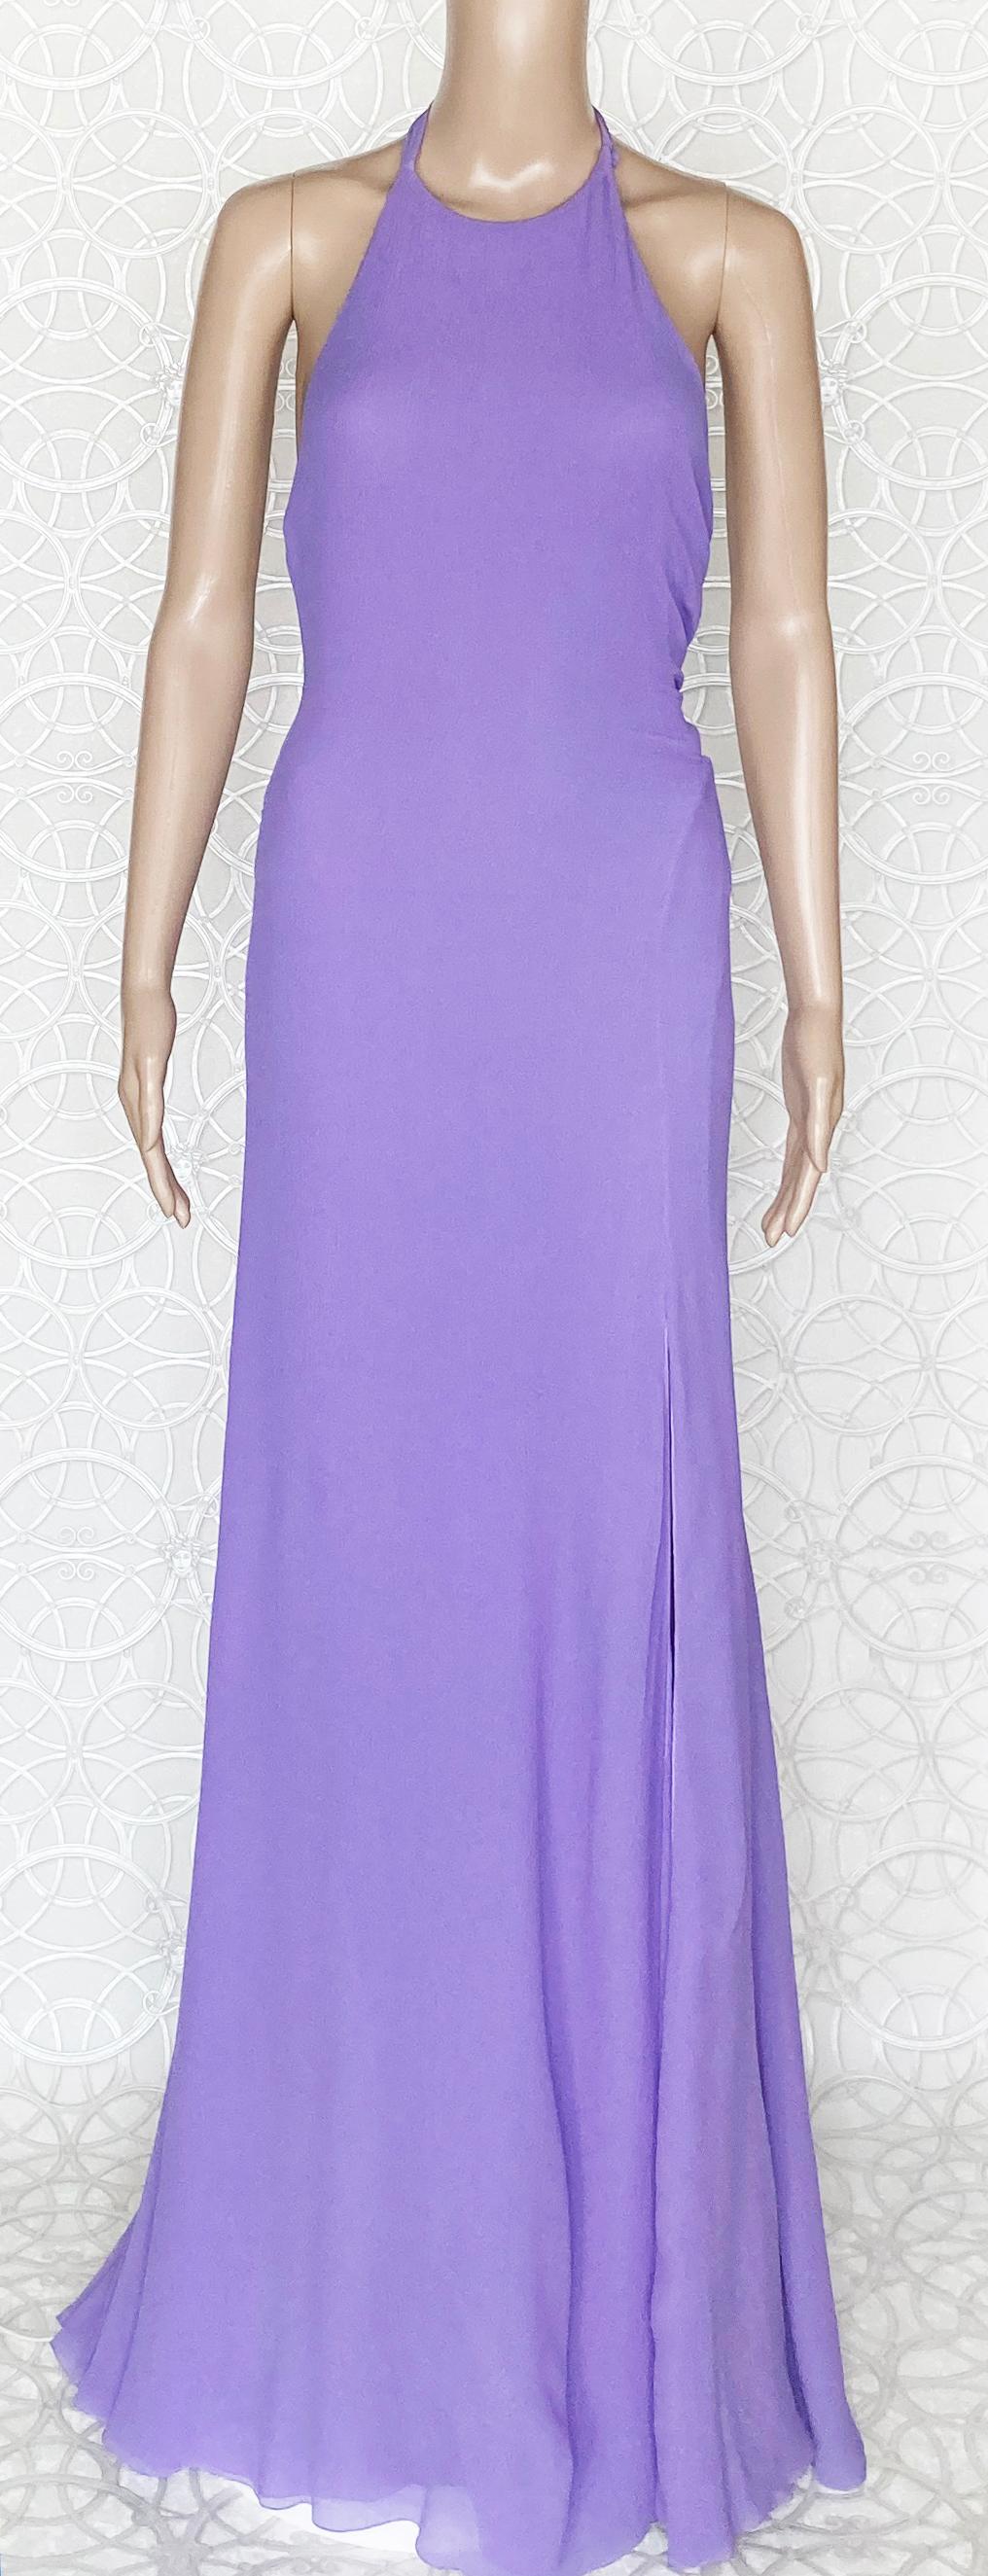 VINTAGE GIANNI VERSACE COUTURE OPEN BACK LILAC SILK DRESS Size 42 - 6 3